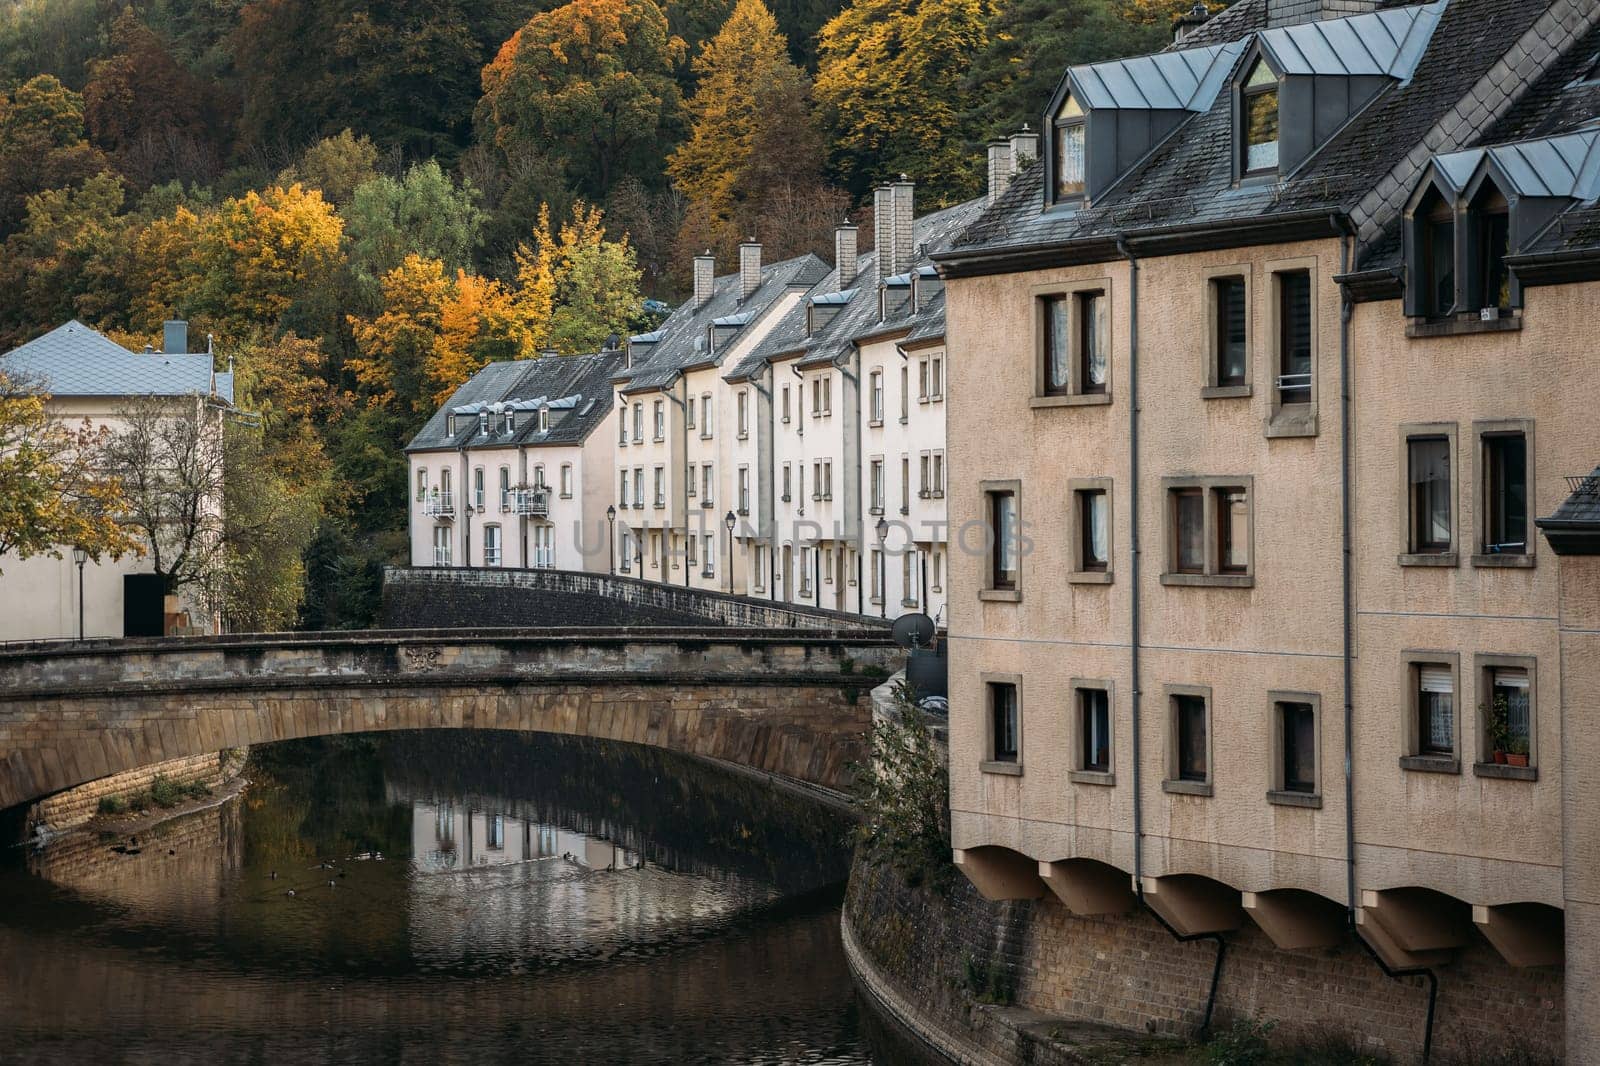 Antique buildings in old town with pedestrian stone bridge over small river. Old city located near forest on hill slope on riverbank in Luxemburg